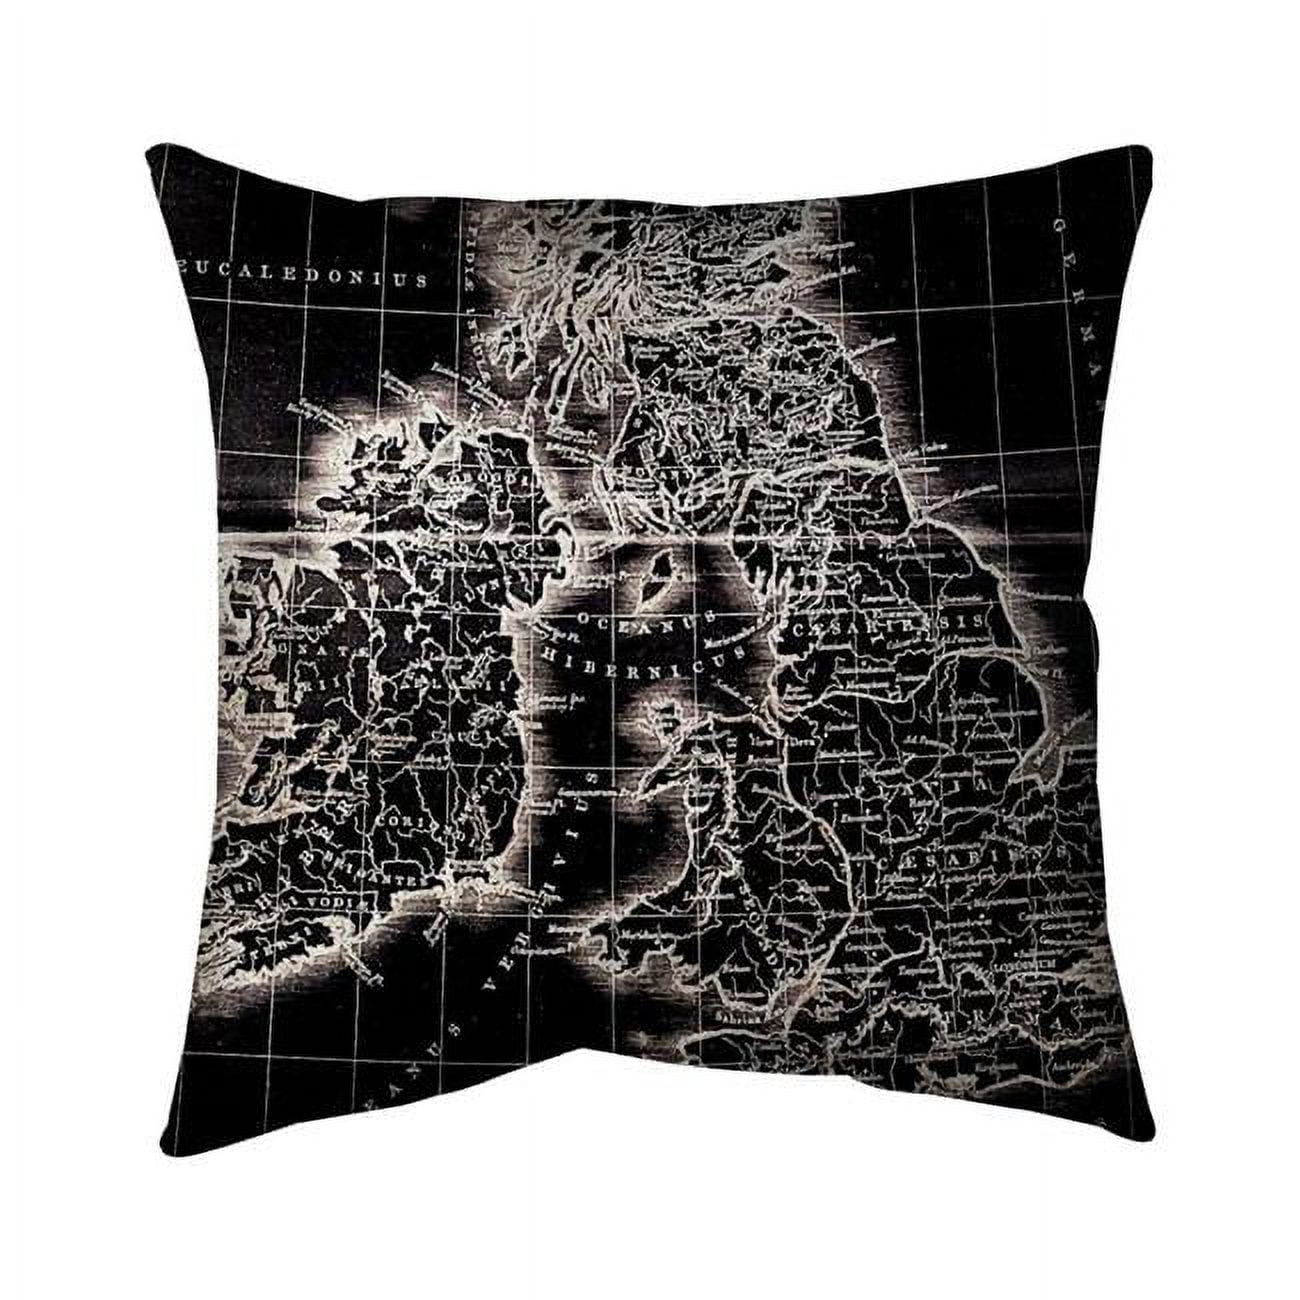 Begin Home Decor 5543-2626-CI105 26 x 26 in. Roman Britain Maps-Double Sided Print Indoor Pillow Cover